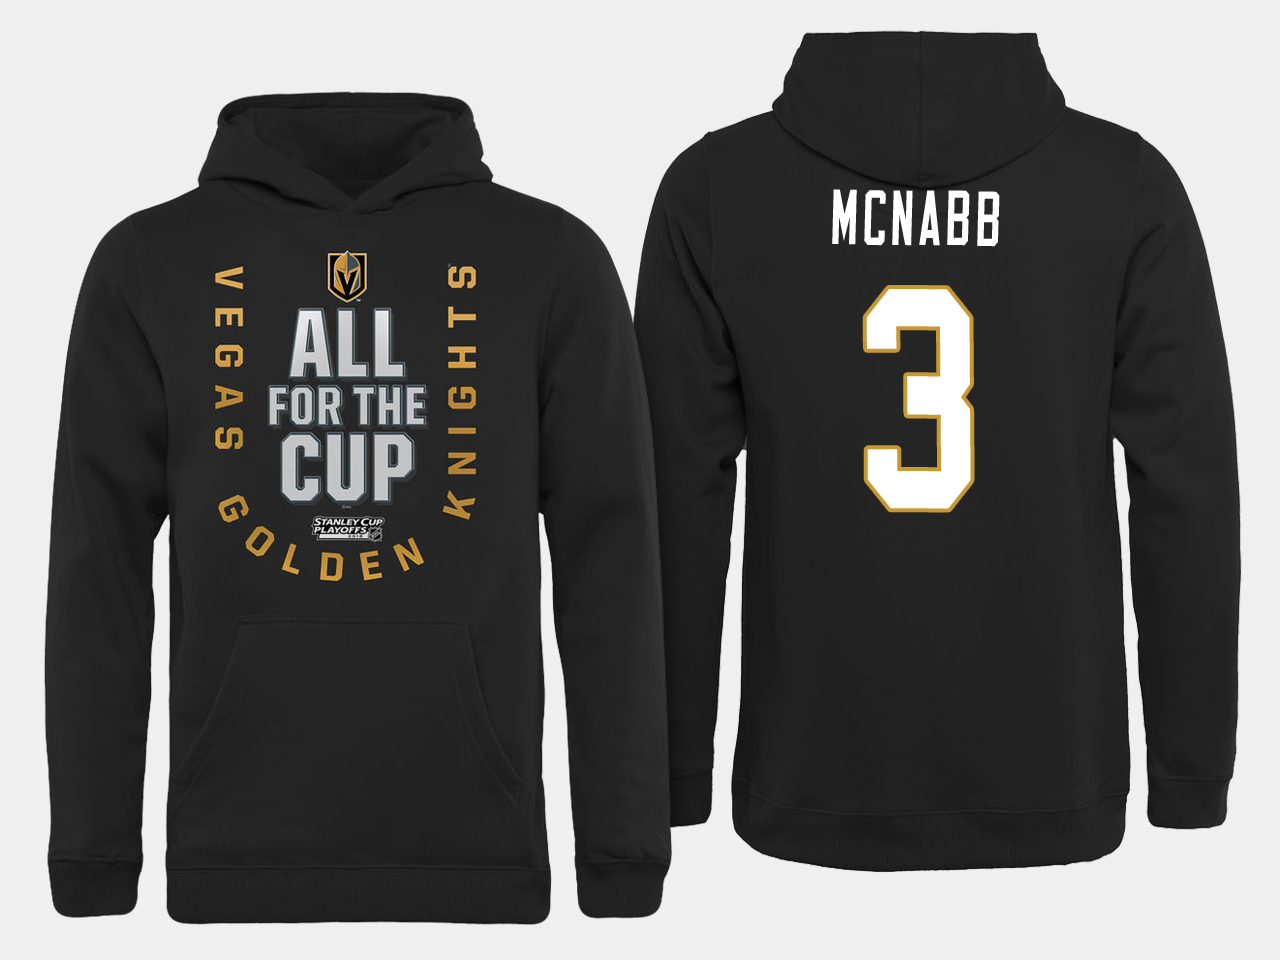 Men NHL Vegas Golden Knights #3 Mcnabb All for the Cup hoodie->more nhl jerseys->NHL Jersey